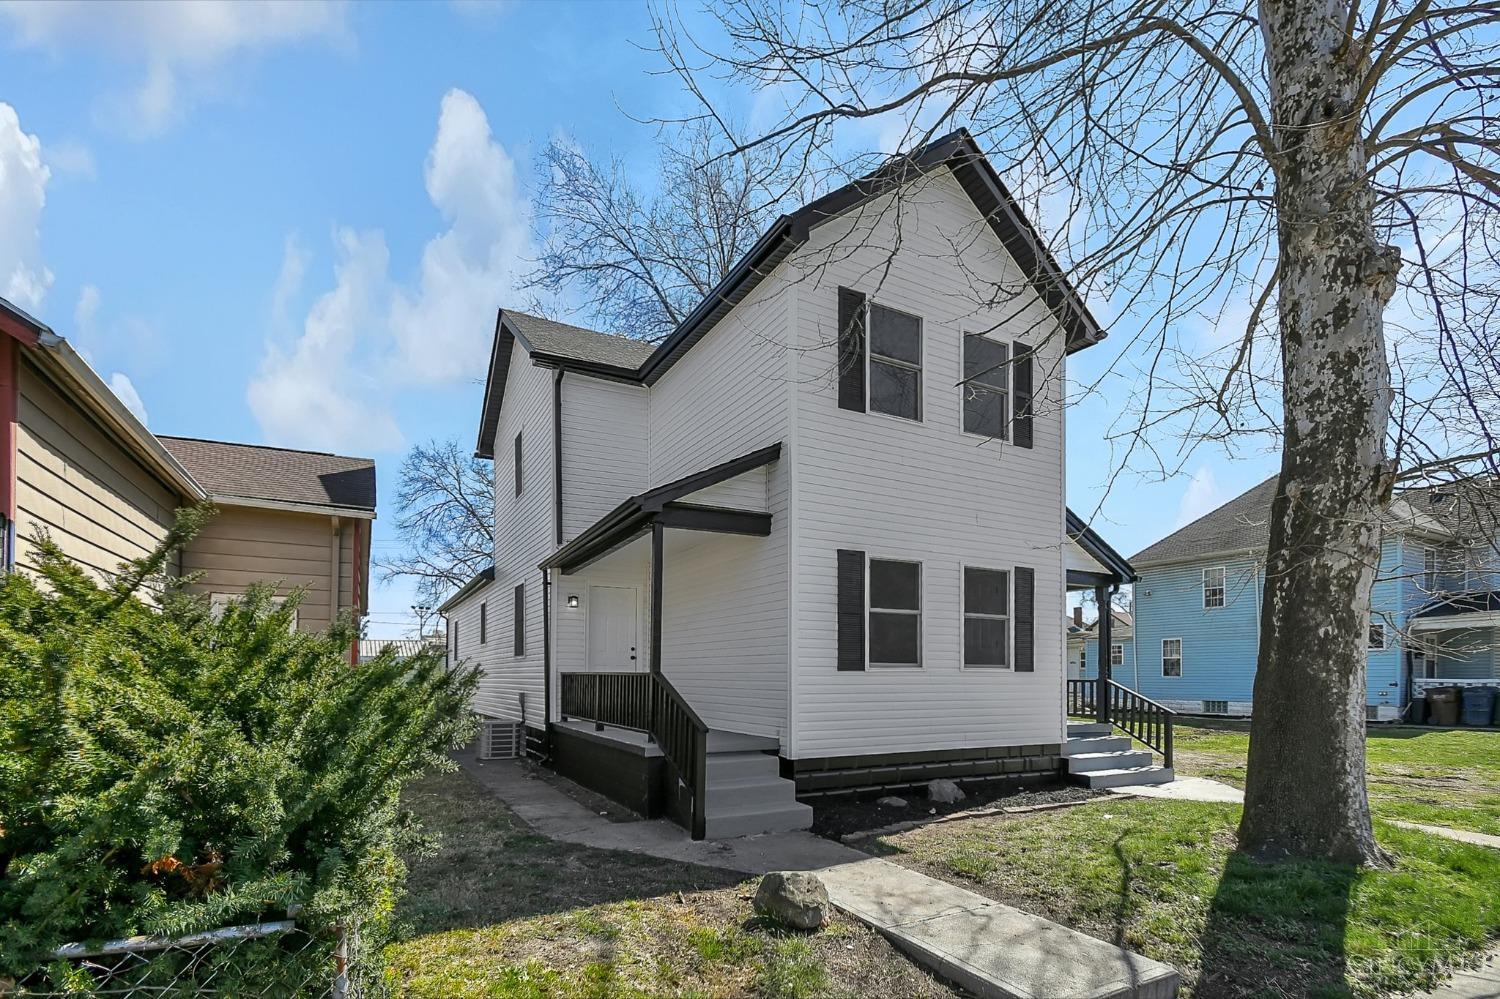 527 Garfield St, Middletown, OH 45044